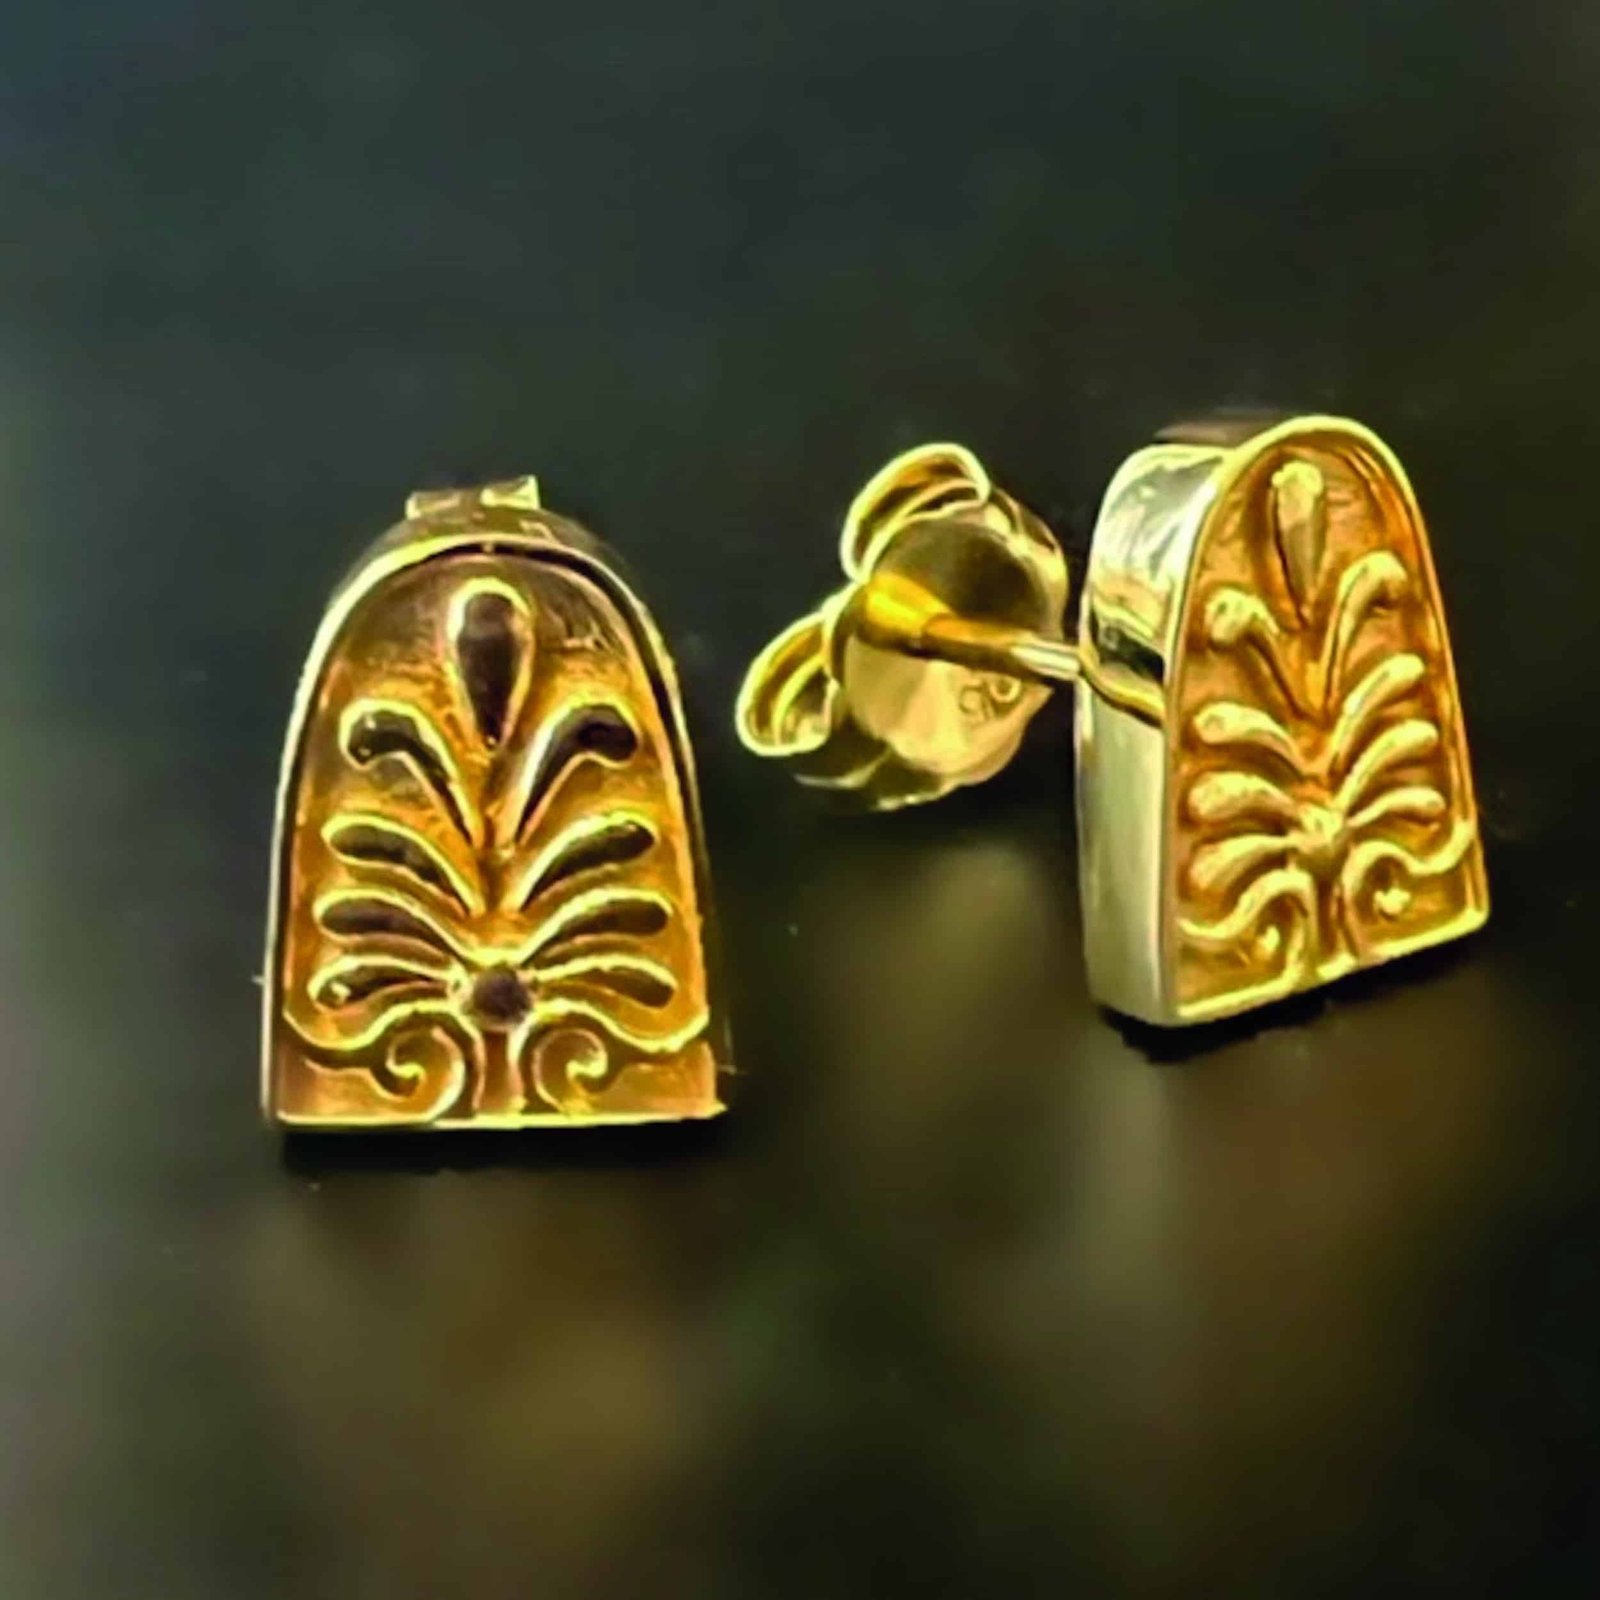 A pair of gold plated stud earrings imported from Rome.